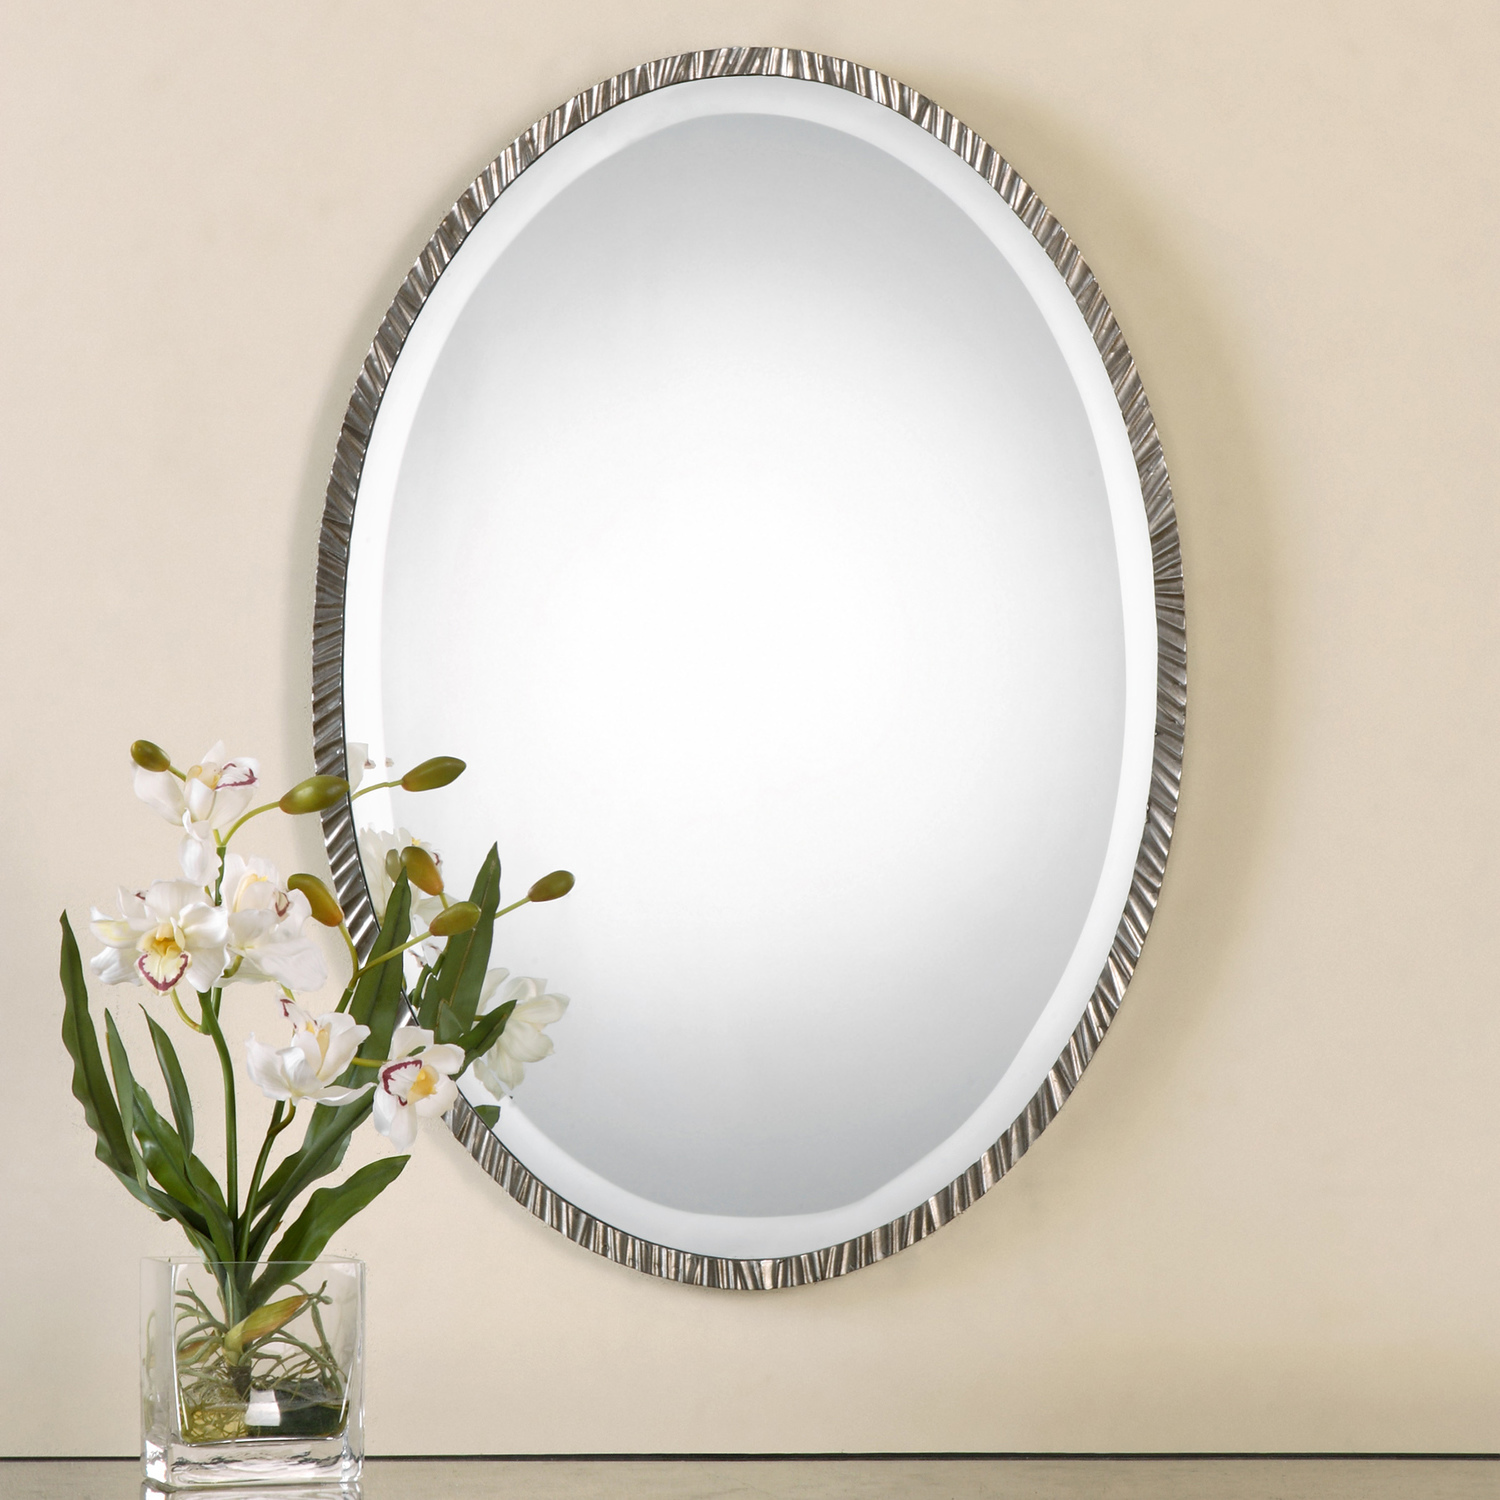 unique bathroom wall mirrors Uttermost Oval Wall Mirrors Textured Metal Frame Finished In A Plated Polished Nickel.